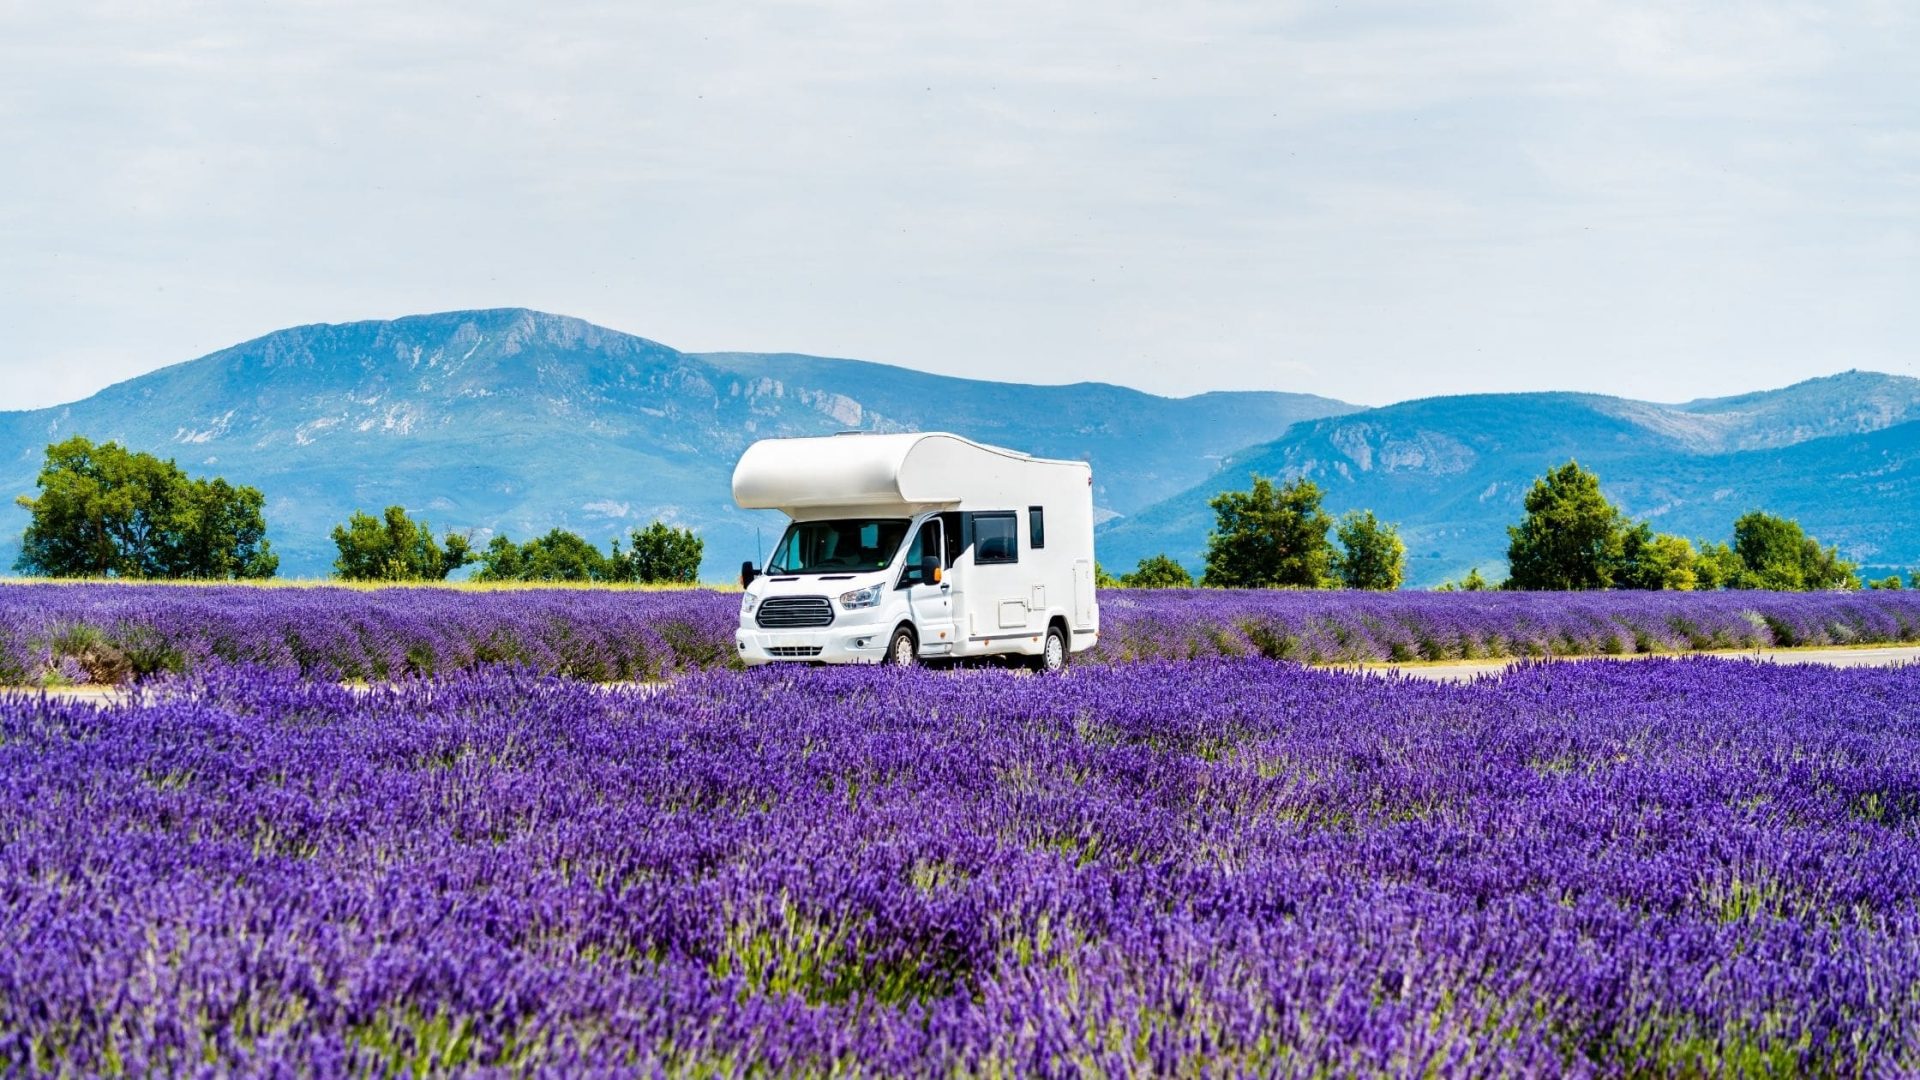 How to Decide What Type of Features You Need on Your Motorhome